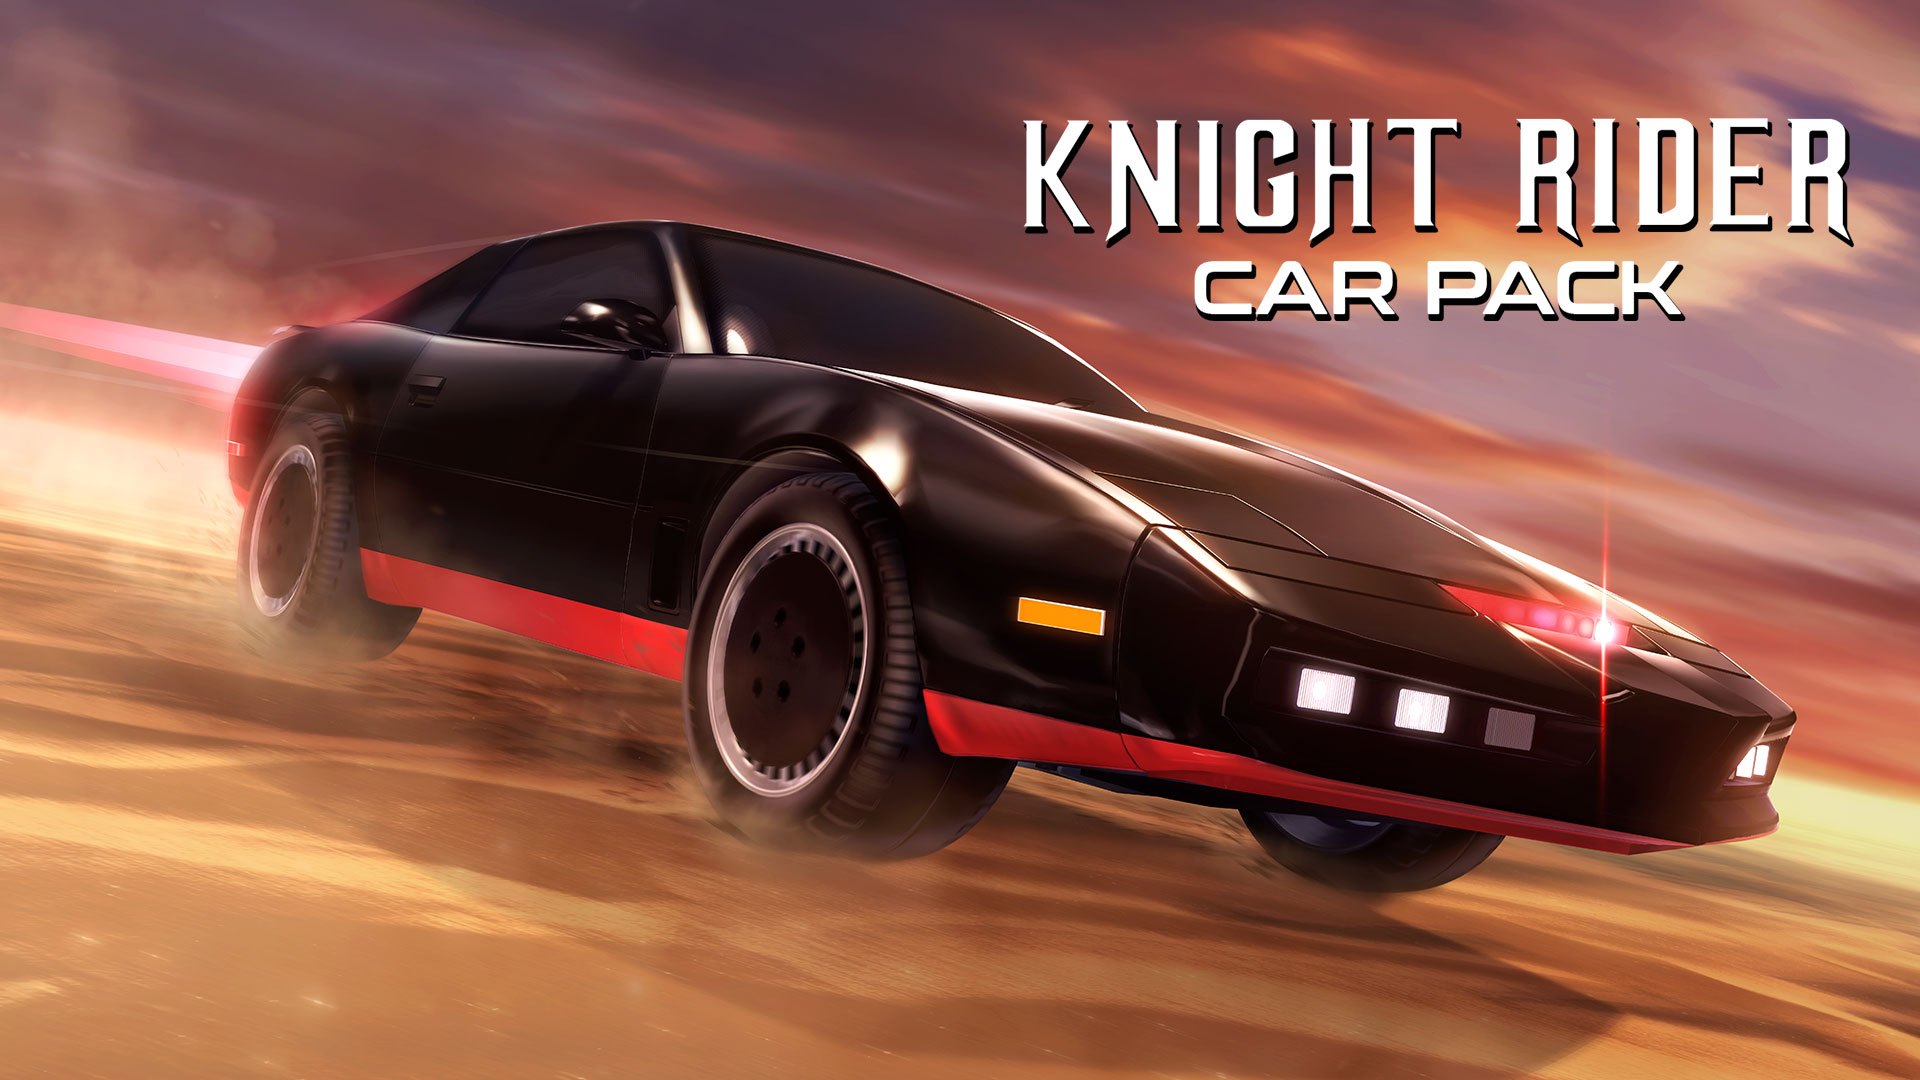 K.I.T.T. from “Knight Rider” Speeds into Rocket League on Xbox One